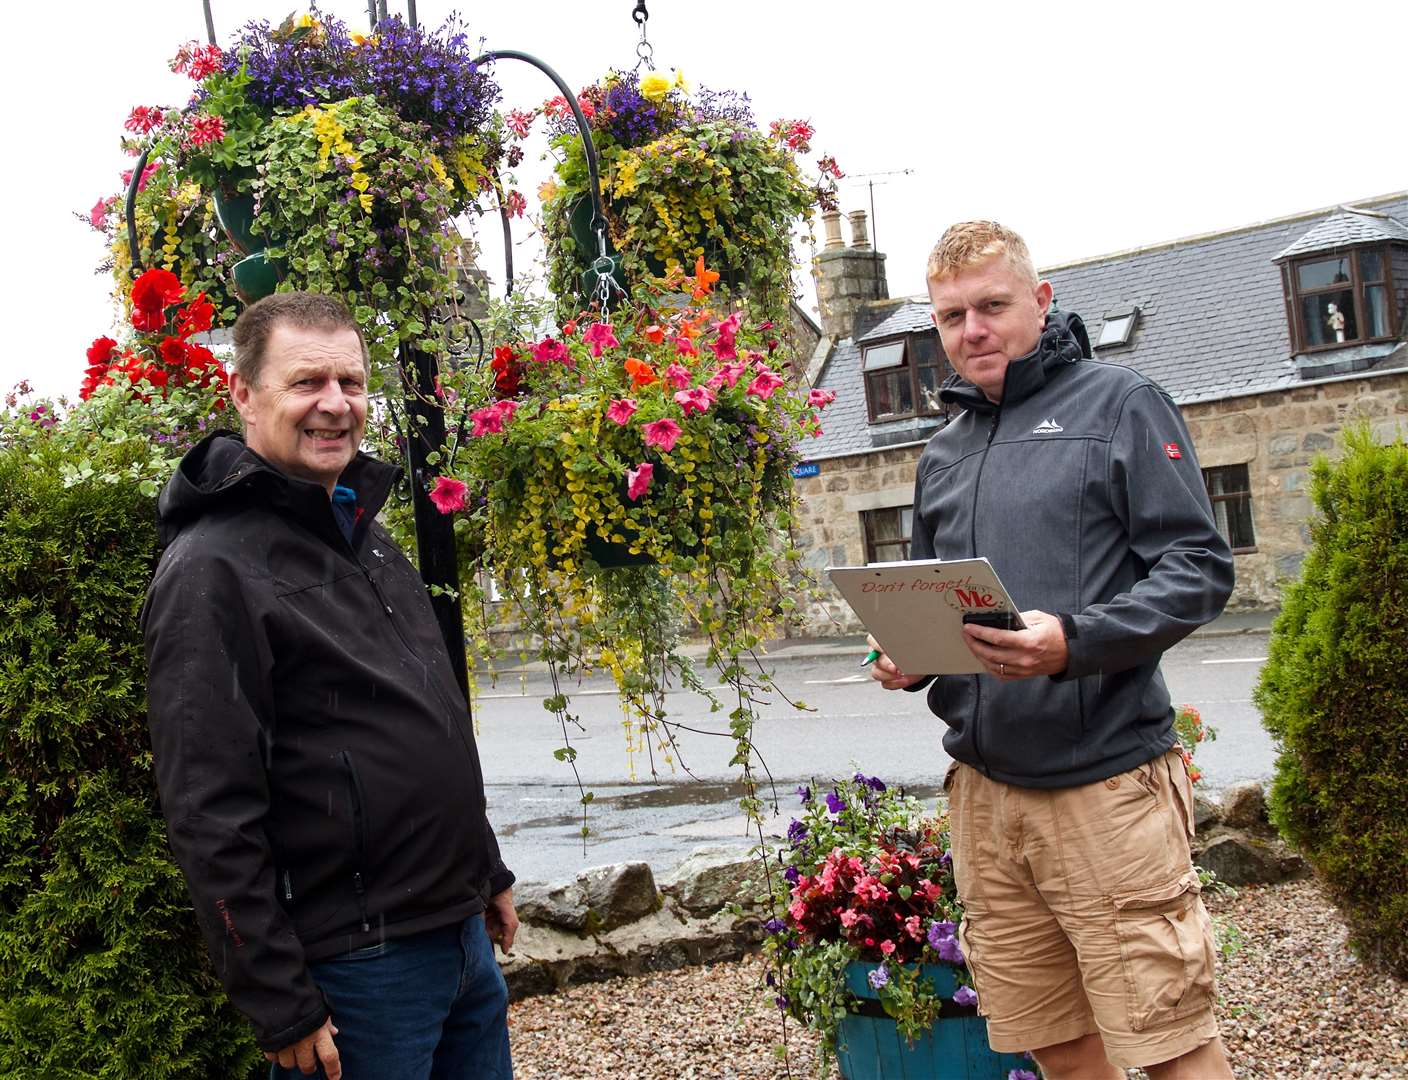 Floral displays across the north-east will be significantly fewer this year, and the annual Formartine In Bloom competition has been cancelled.